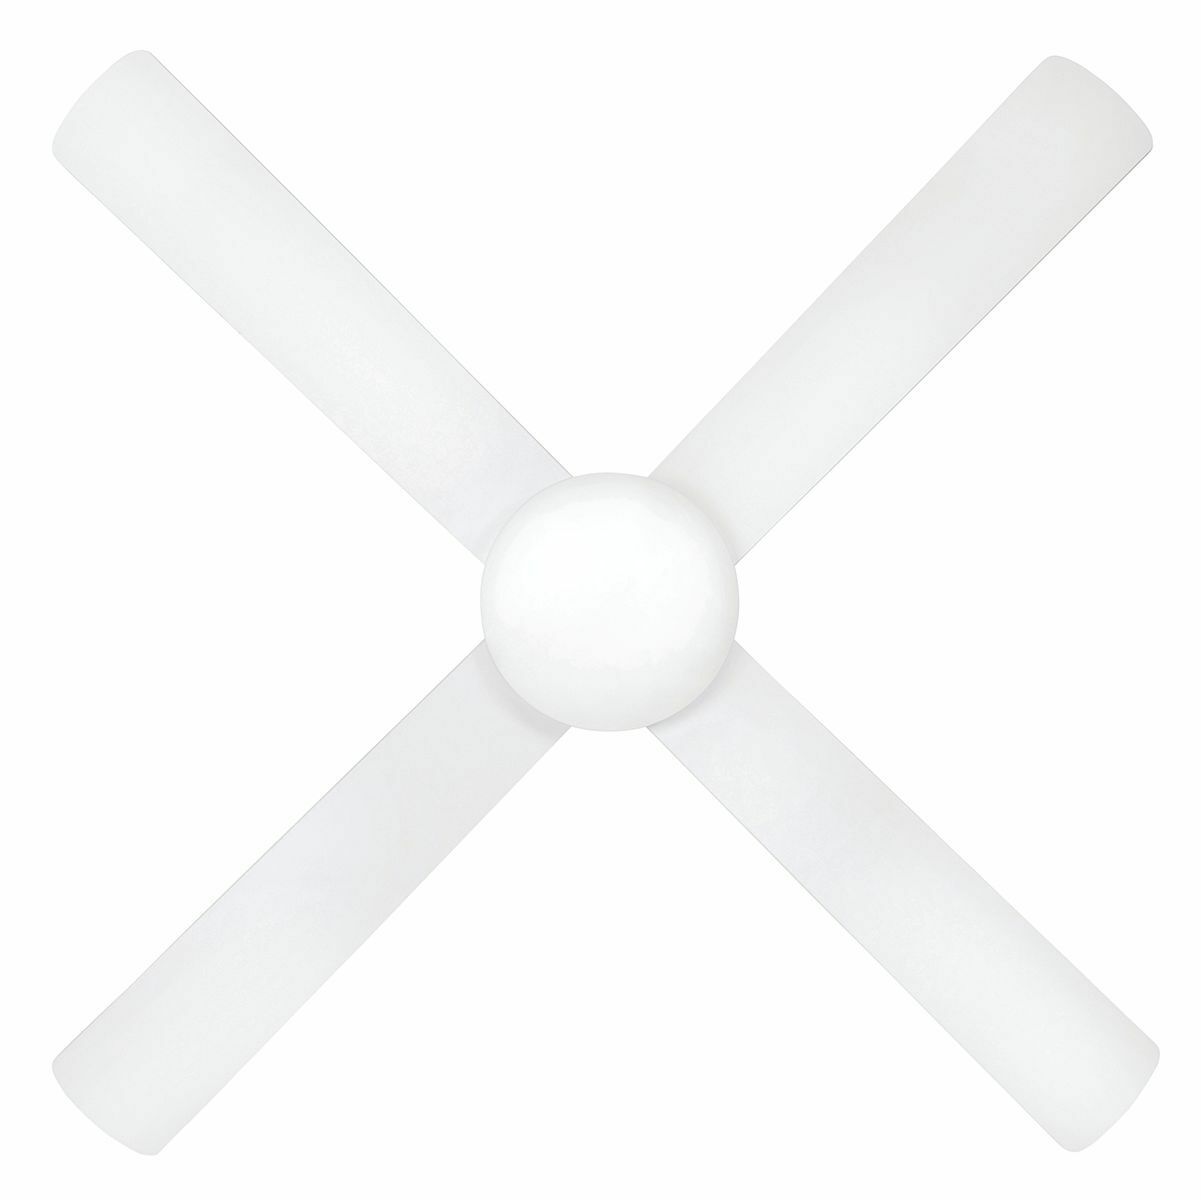 Tempo PLUS 48" Timber 4 Blade Ceiling Fan